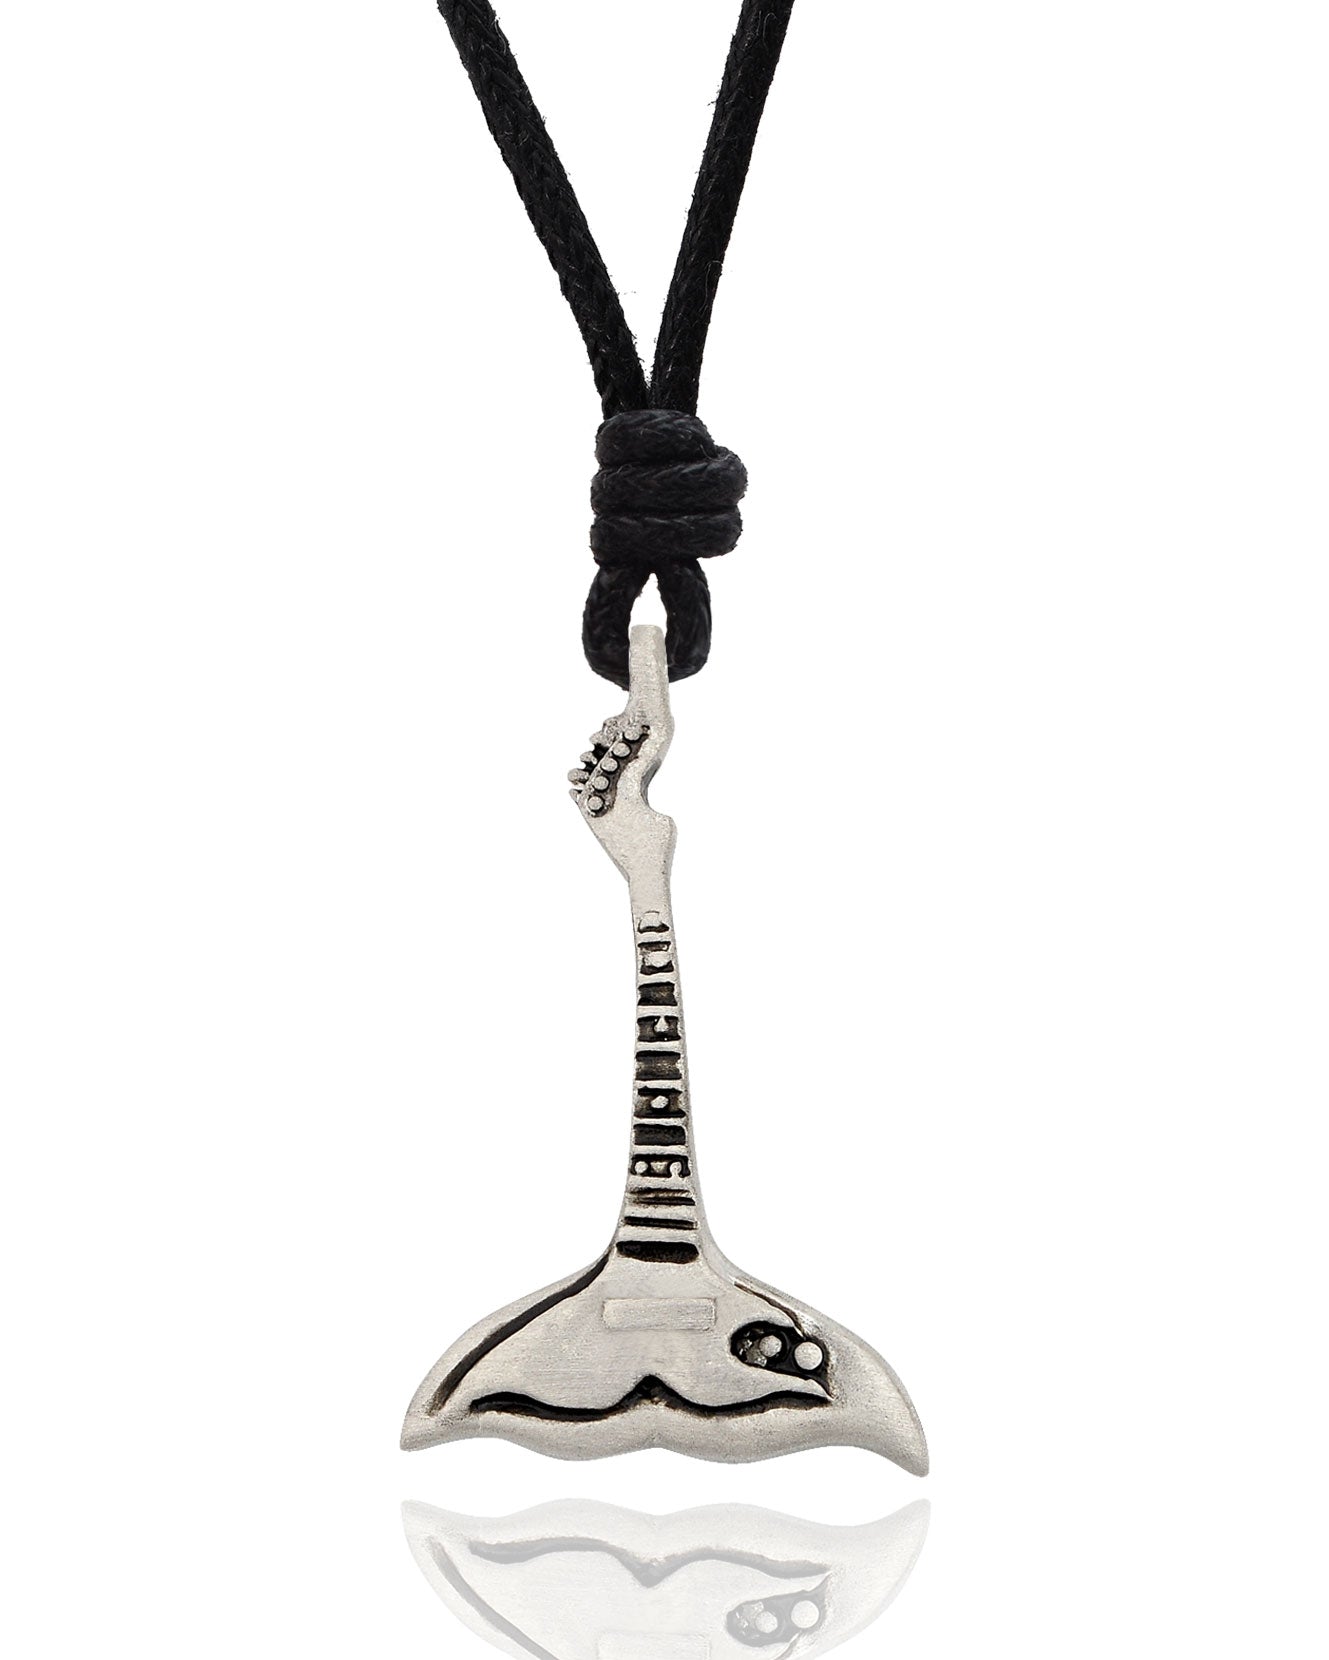 Whale Tail Guitar Silver Pewter Charm Necklace Pendant Jewelry